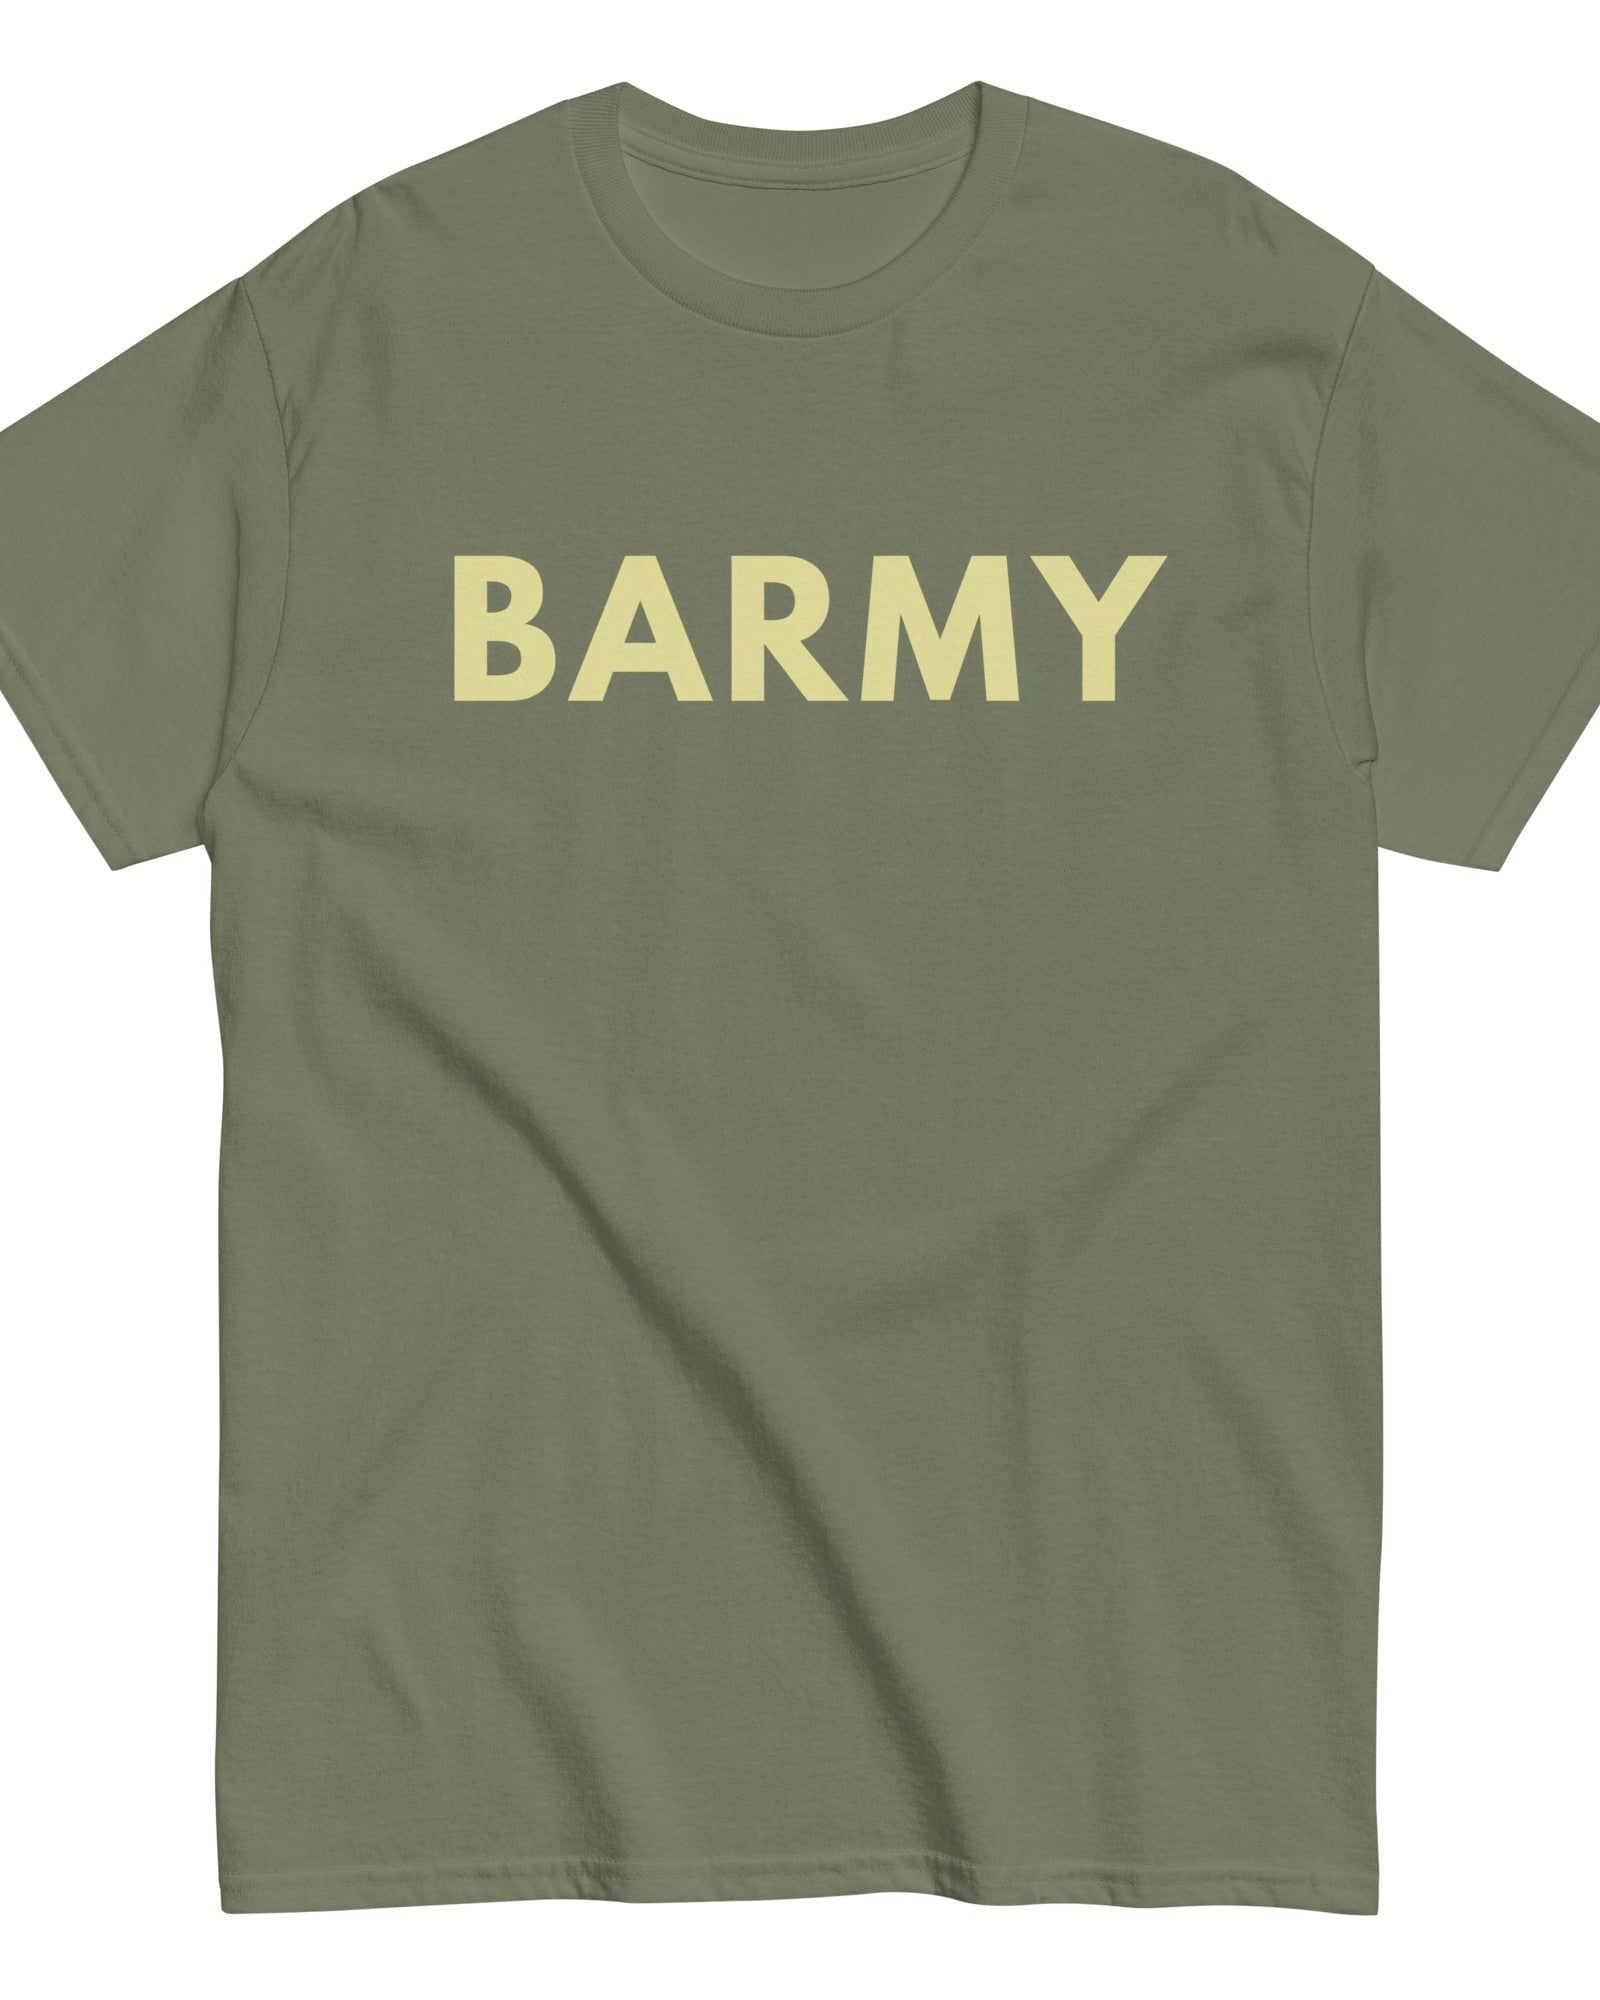 The Barmy collection brings smiles everywhere you go. Join the Barmy with these fun and fantastic T-shirts, Hoodies, Sweatshirts, Jumpers, Long-Sleeve Shirts, Vests (Tank Tops) and more. Barmy Strong.